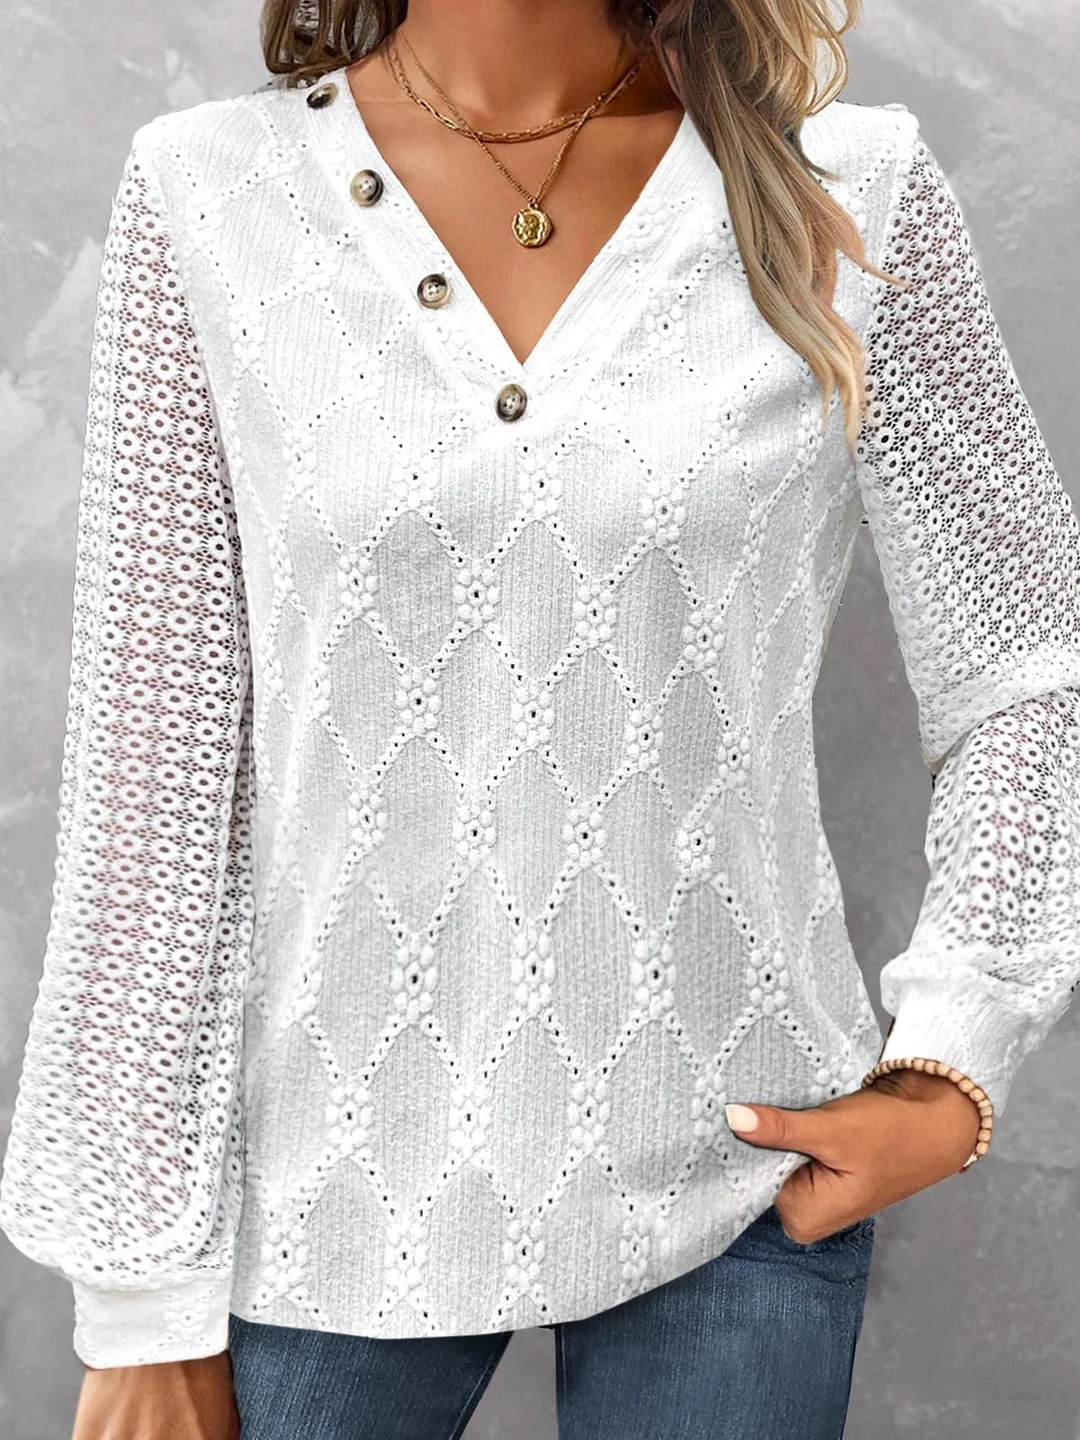 Women plus size clothing Women Long Sleeve V-neck Solid Lace Button Tops-Nordswear